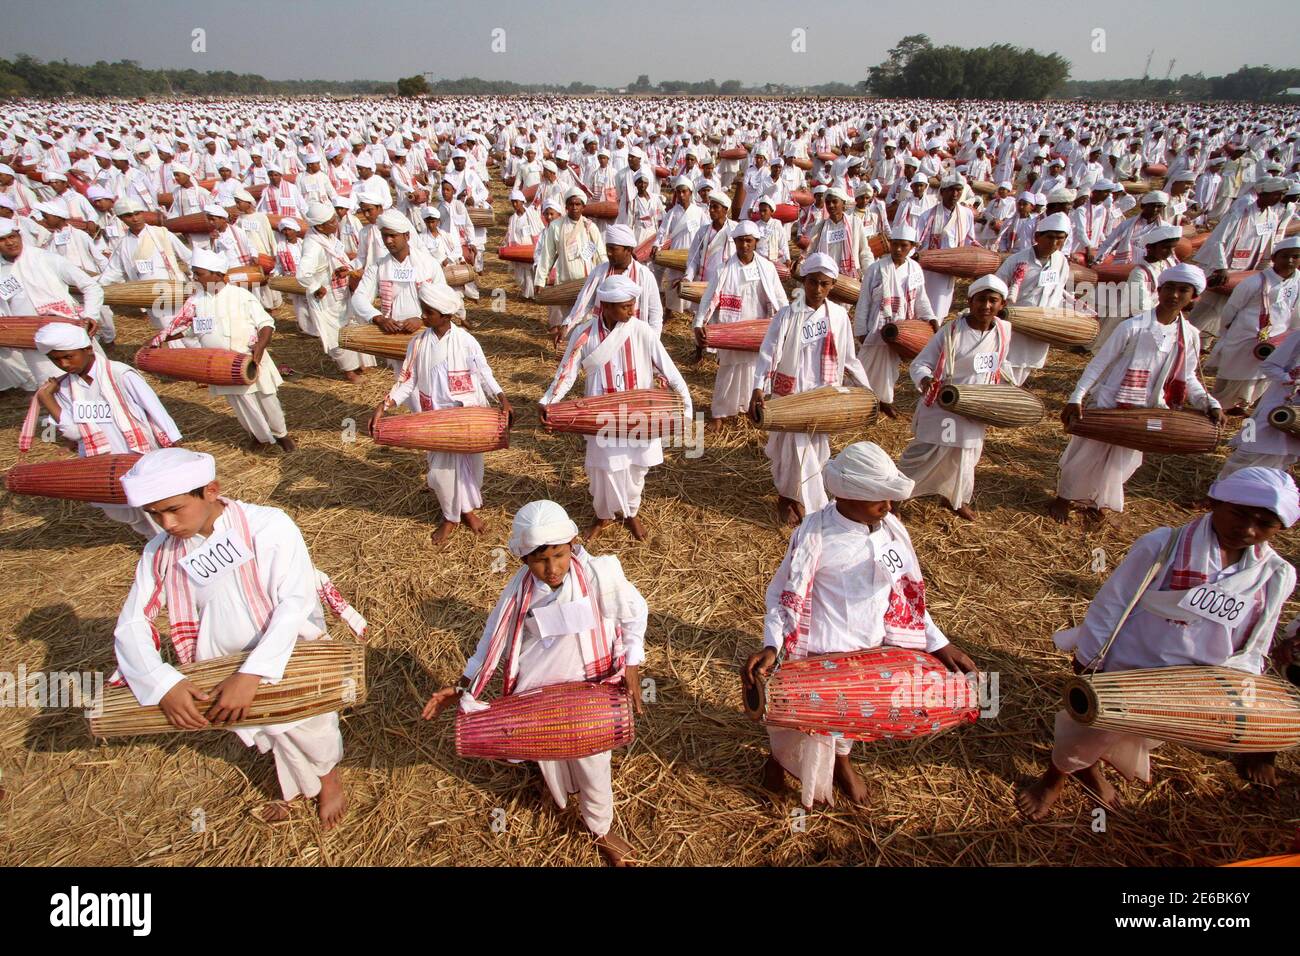 People in traditional attires play their drums during an attempt to enter the Guinness Book of World Record at a field in Titabar town in the northeastern Indian state of Assam January 6, 2013. A total of 14,833 Assamese people on Sunday attempted to enter the Guinness Book of World Record by playing the drums for 15 minutes non stop, organisers said. REUTERS/Utpal Baruah (INDIA - Tags: ENTERTAINMENT SOCIETY) Stock Photo